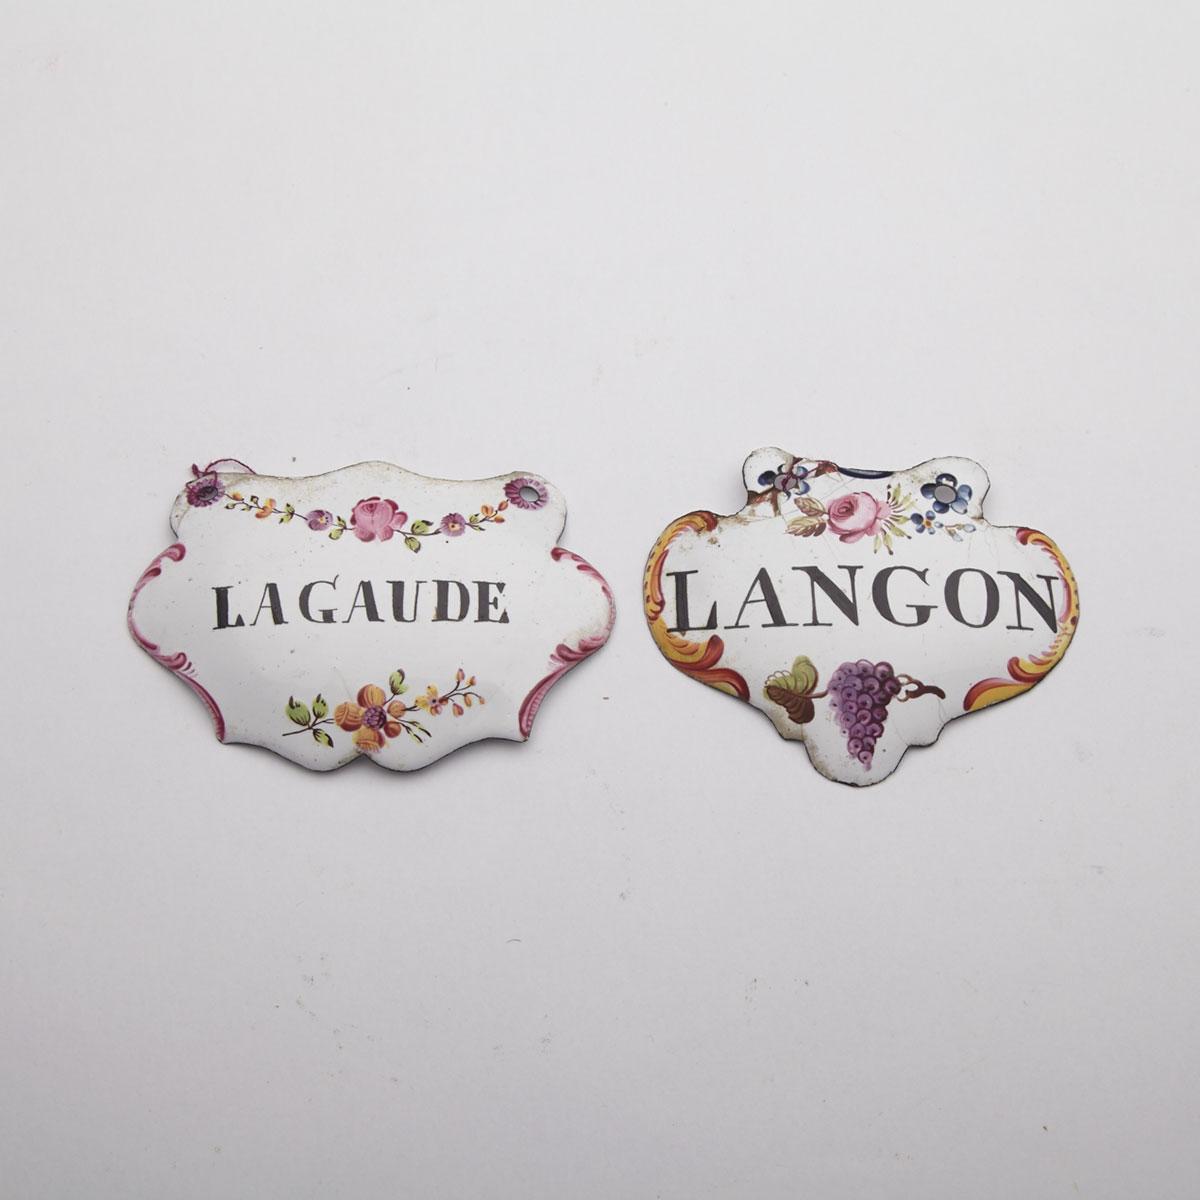 Two Enamel Wine Labels, late 18th century